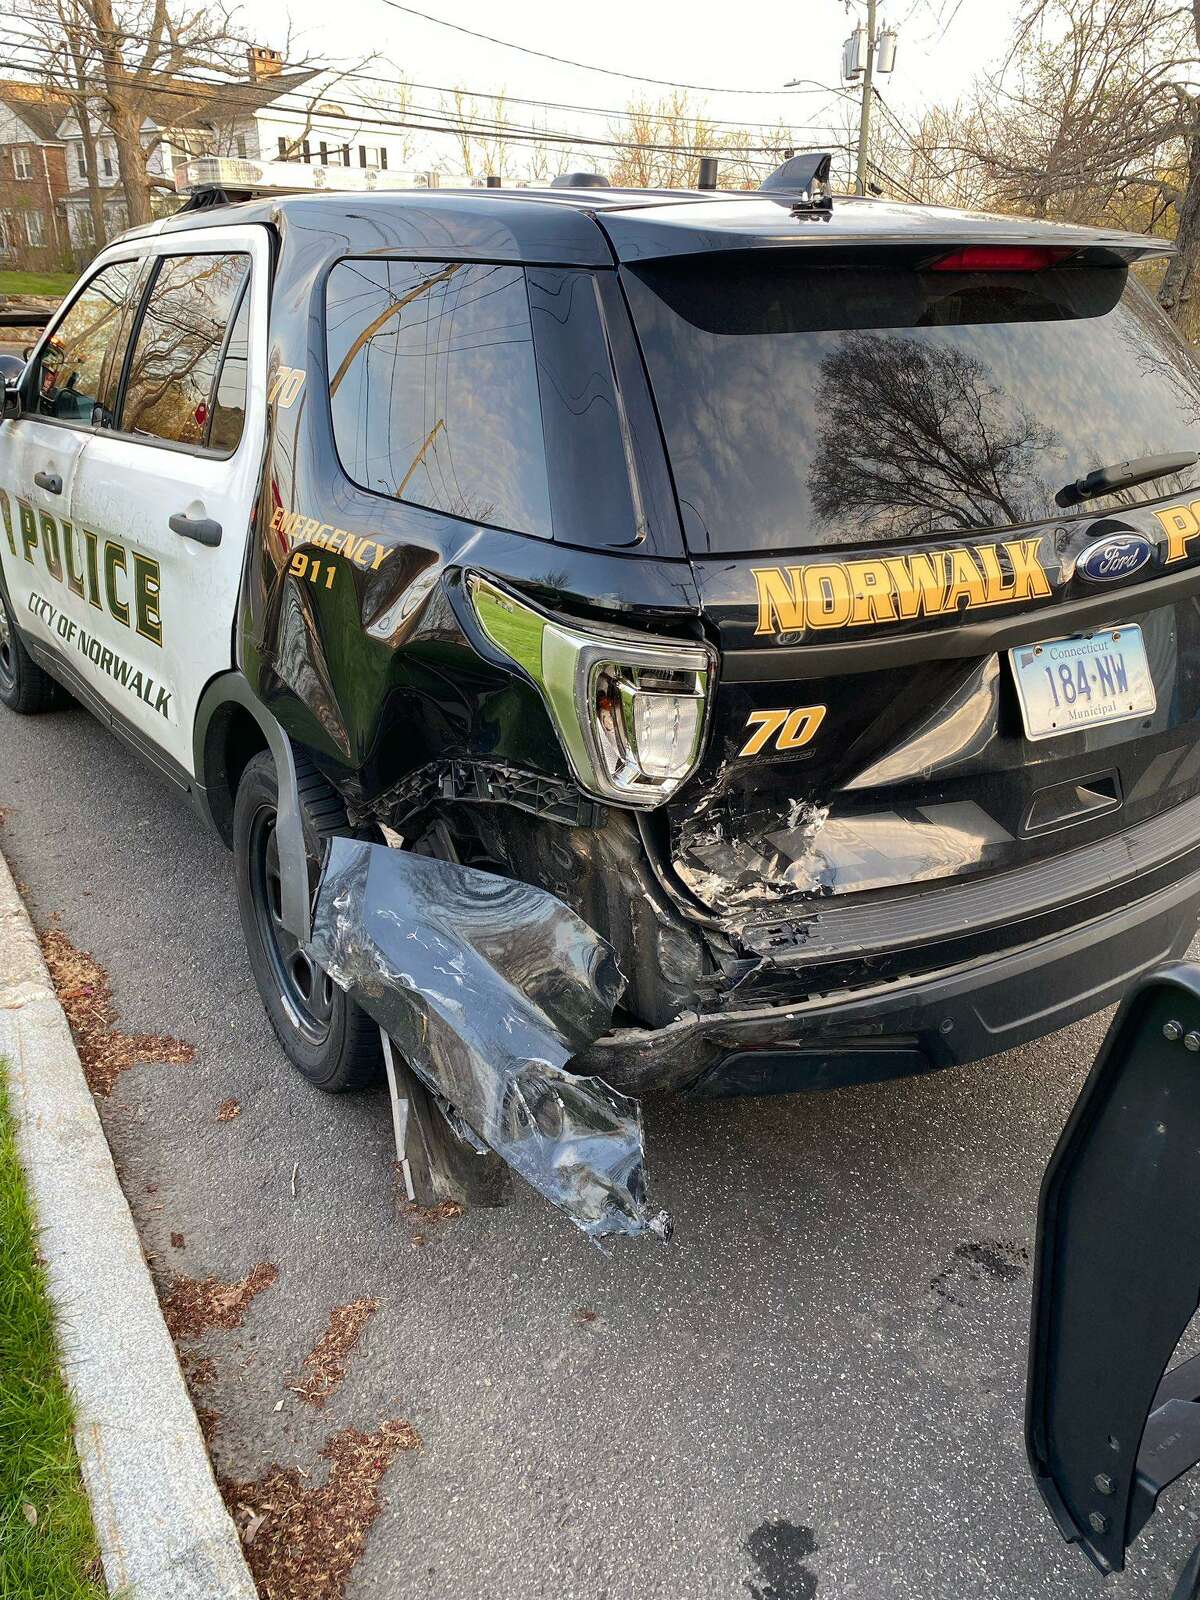 Authorities said officers were investigating a crash near the Norwalk Green in Norwalk, Conn., on Wednesday, April 20, 2022, when two cruisers were struck by another vehicle.